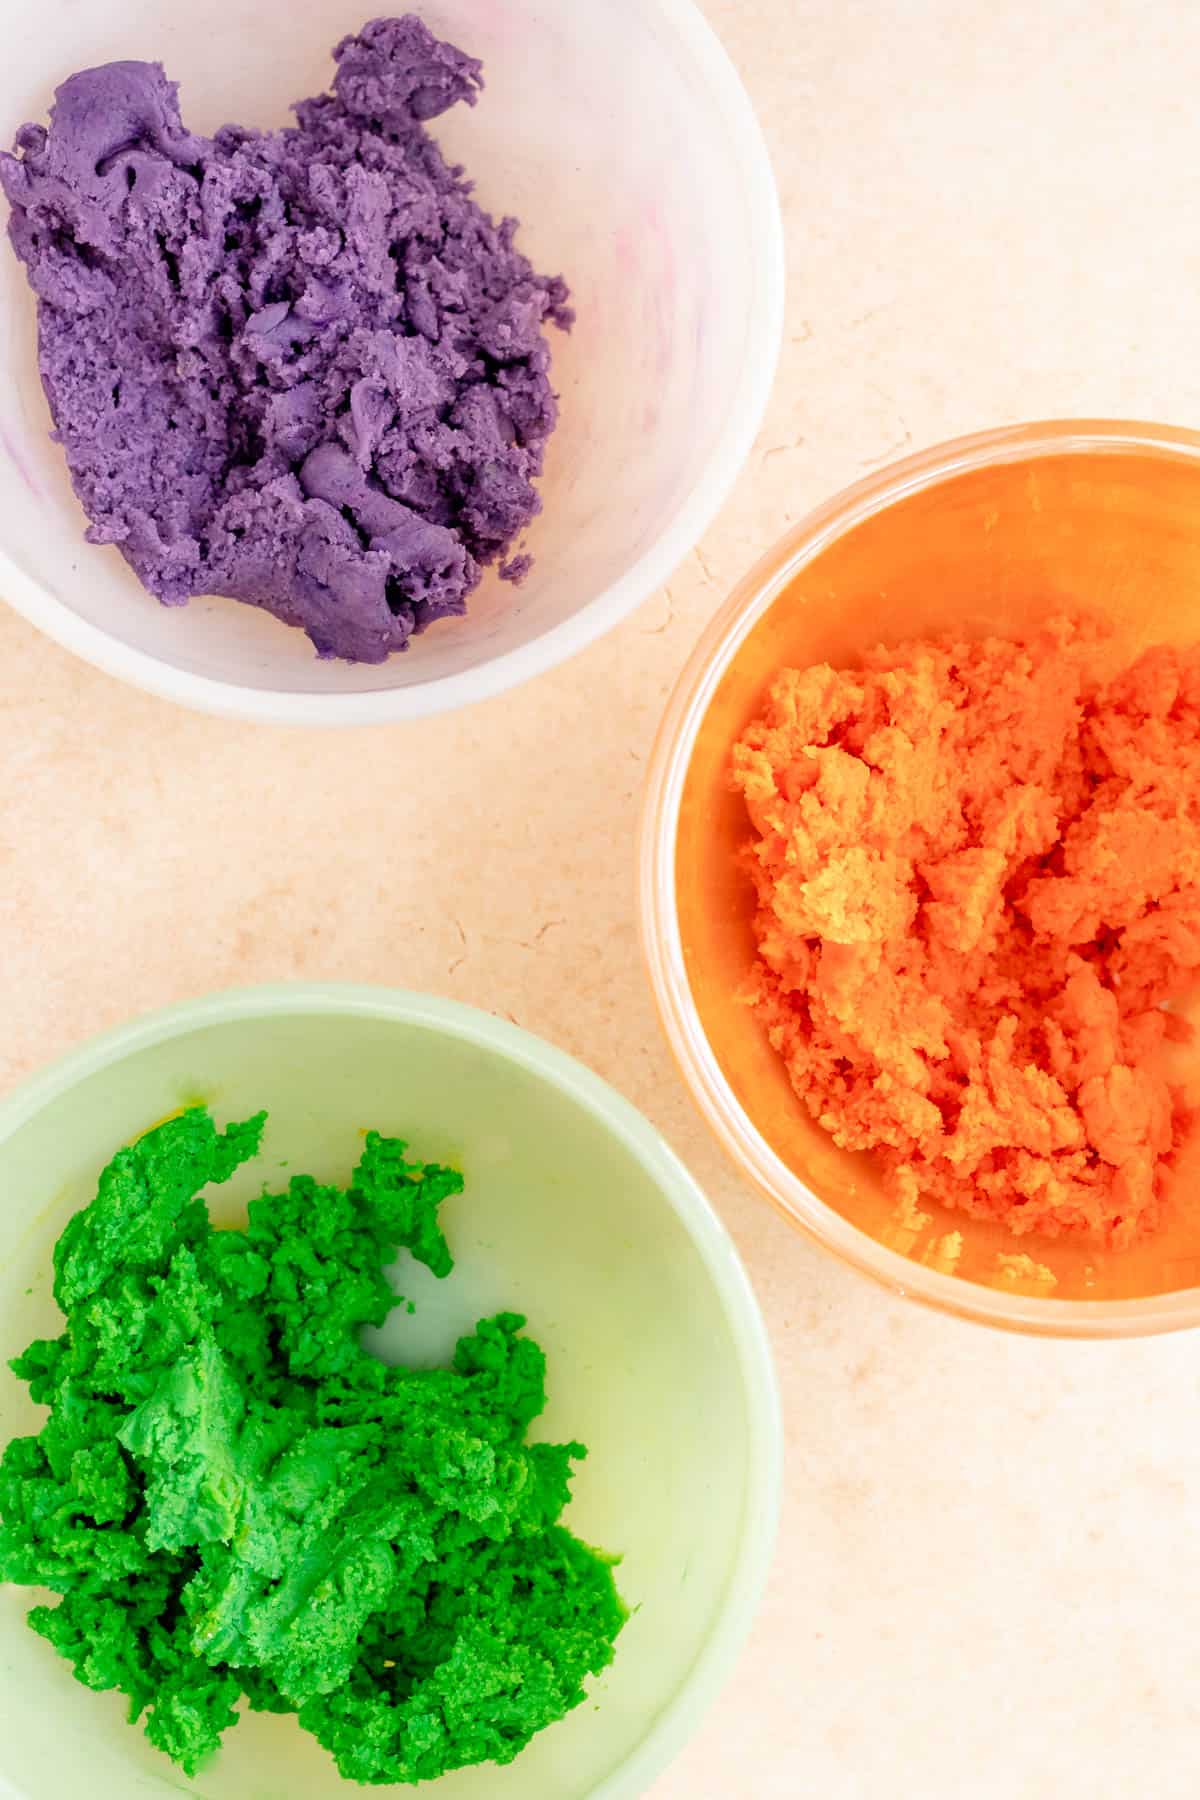 purple orange and green dough in separate bowls